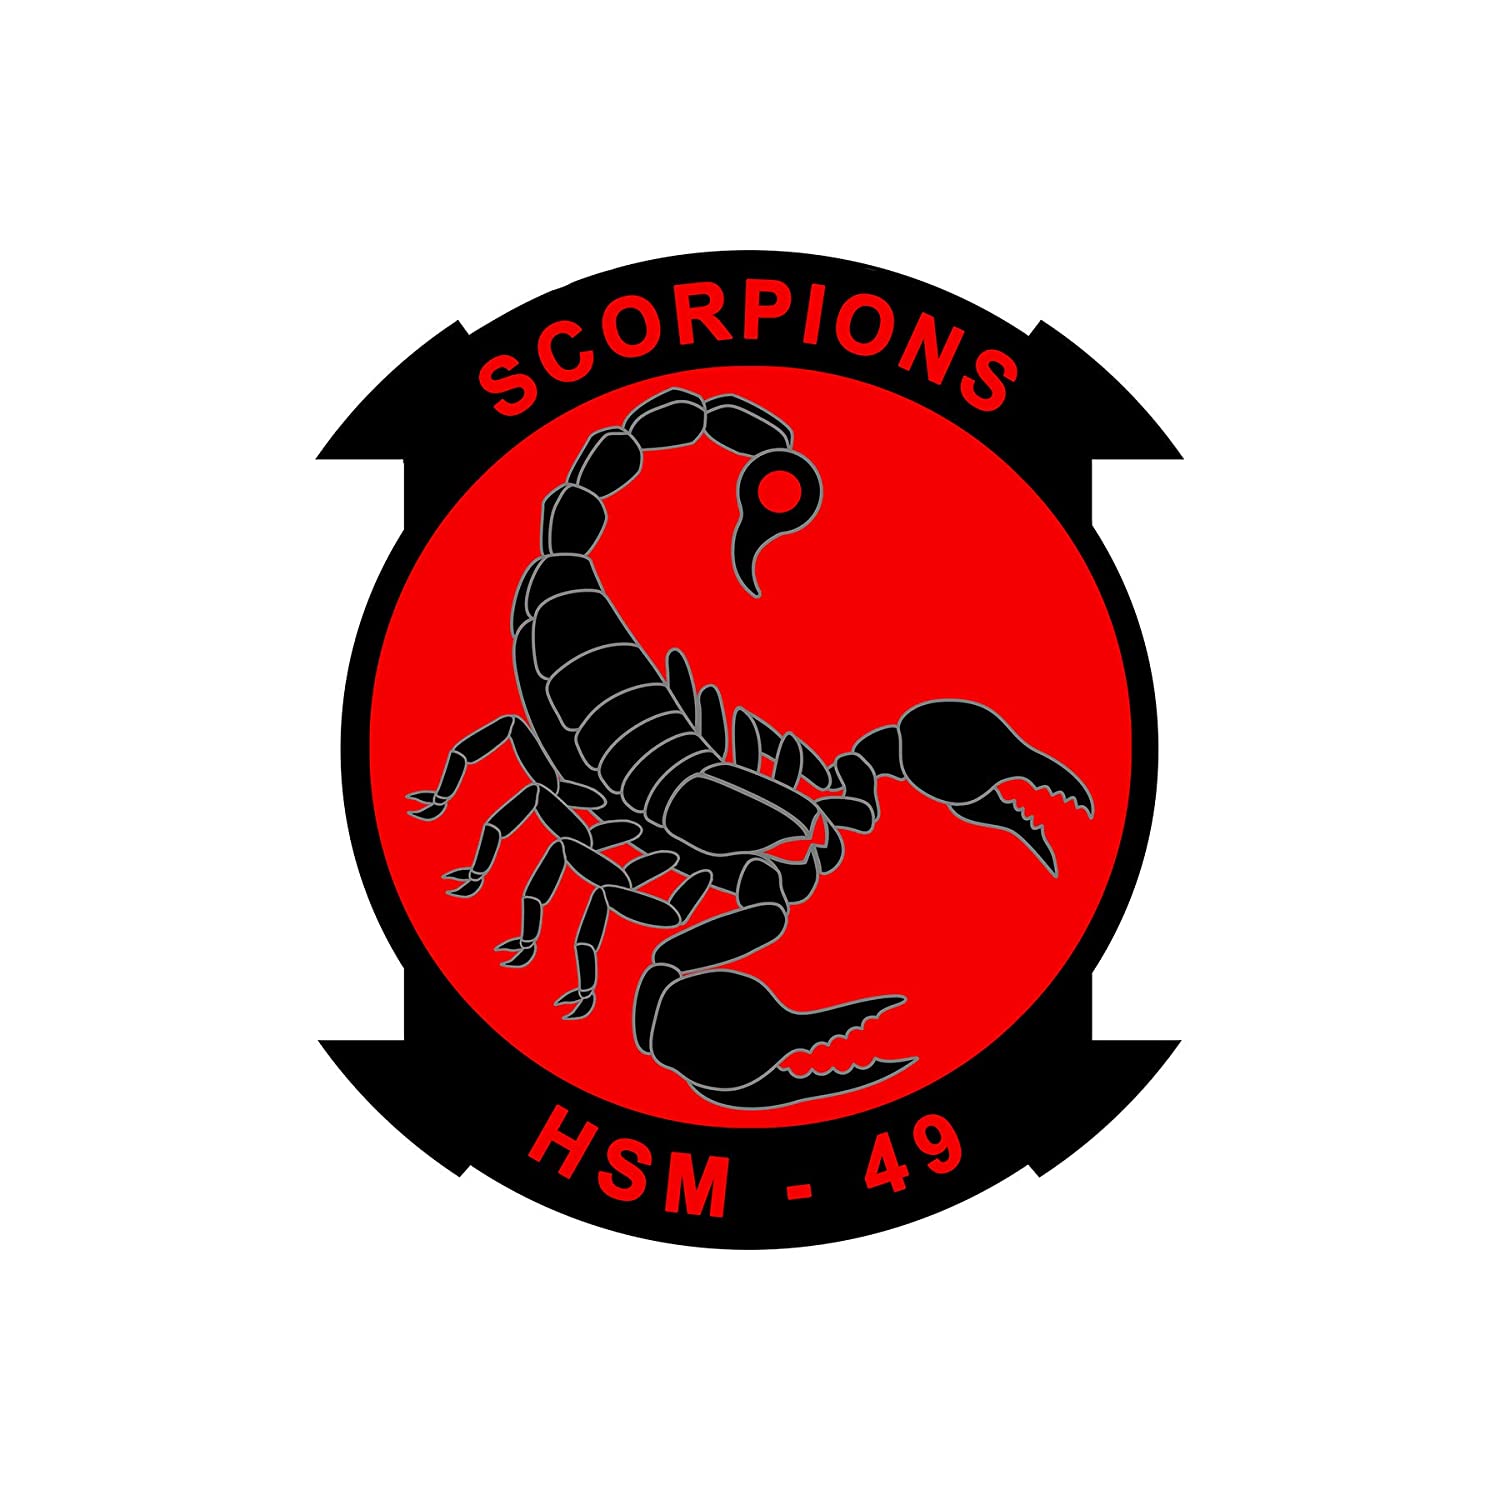 49 Helicopter Maritime Strike Squadron Scorpions - Patch Vinyl Decal - Available in Multiple Sizes